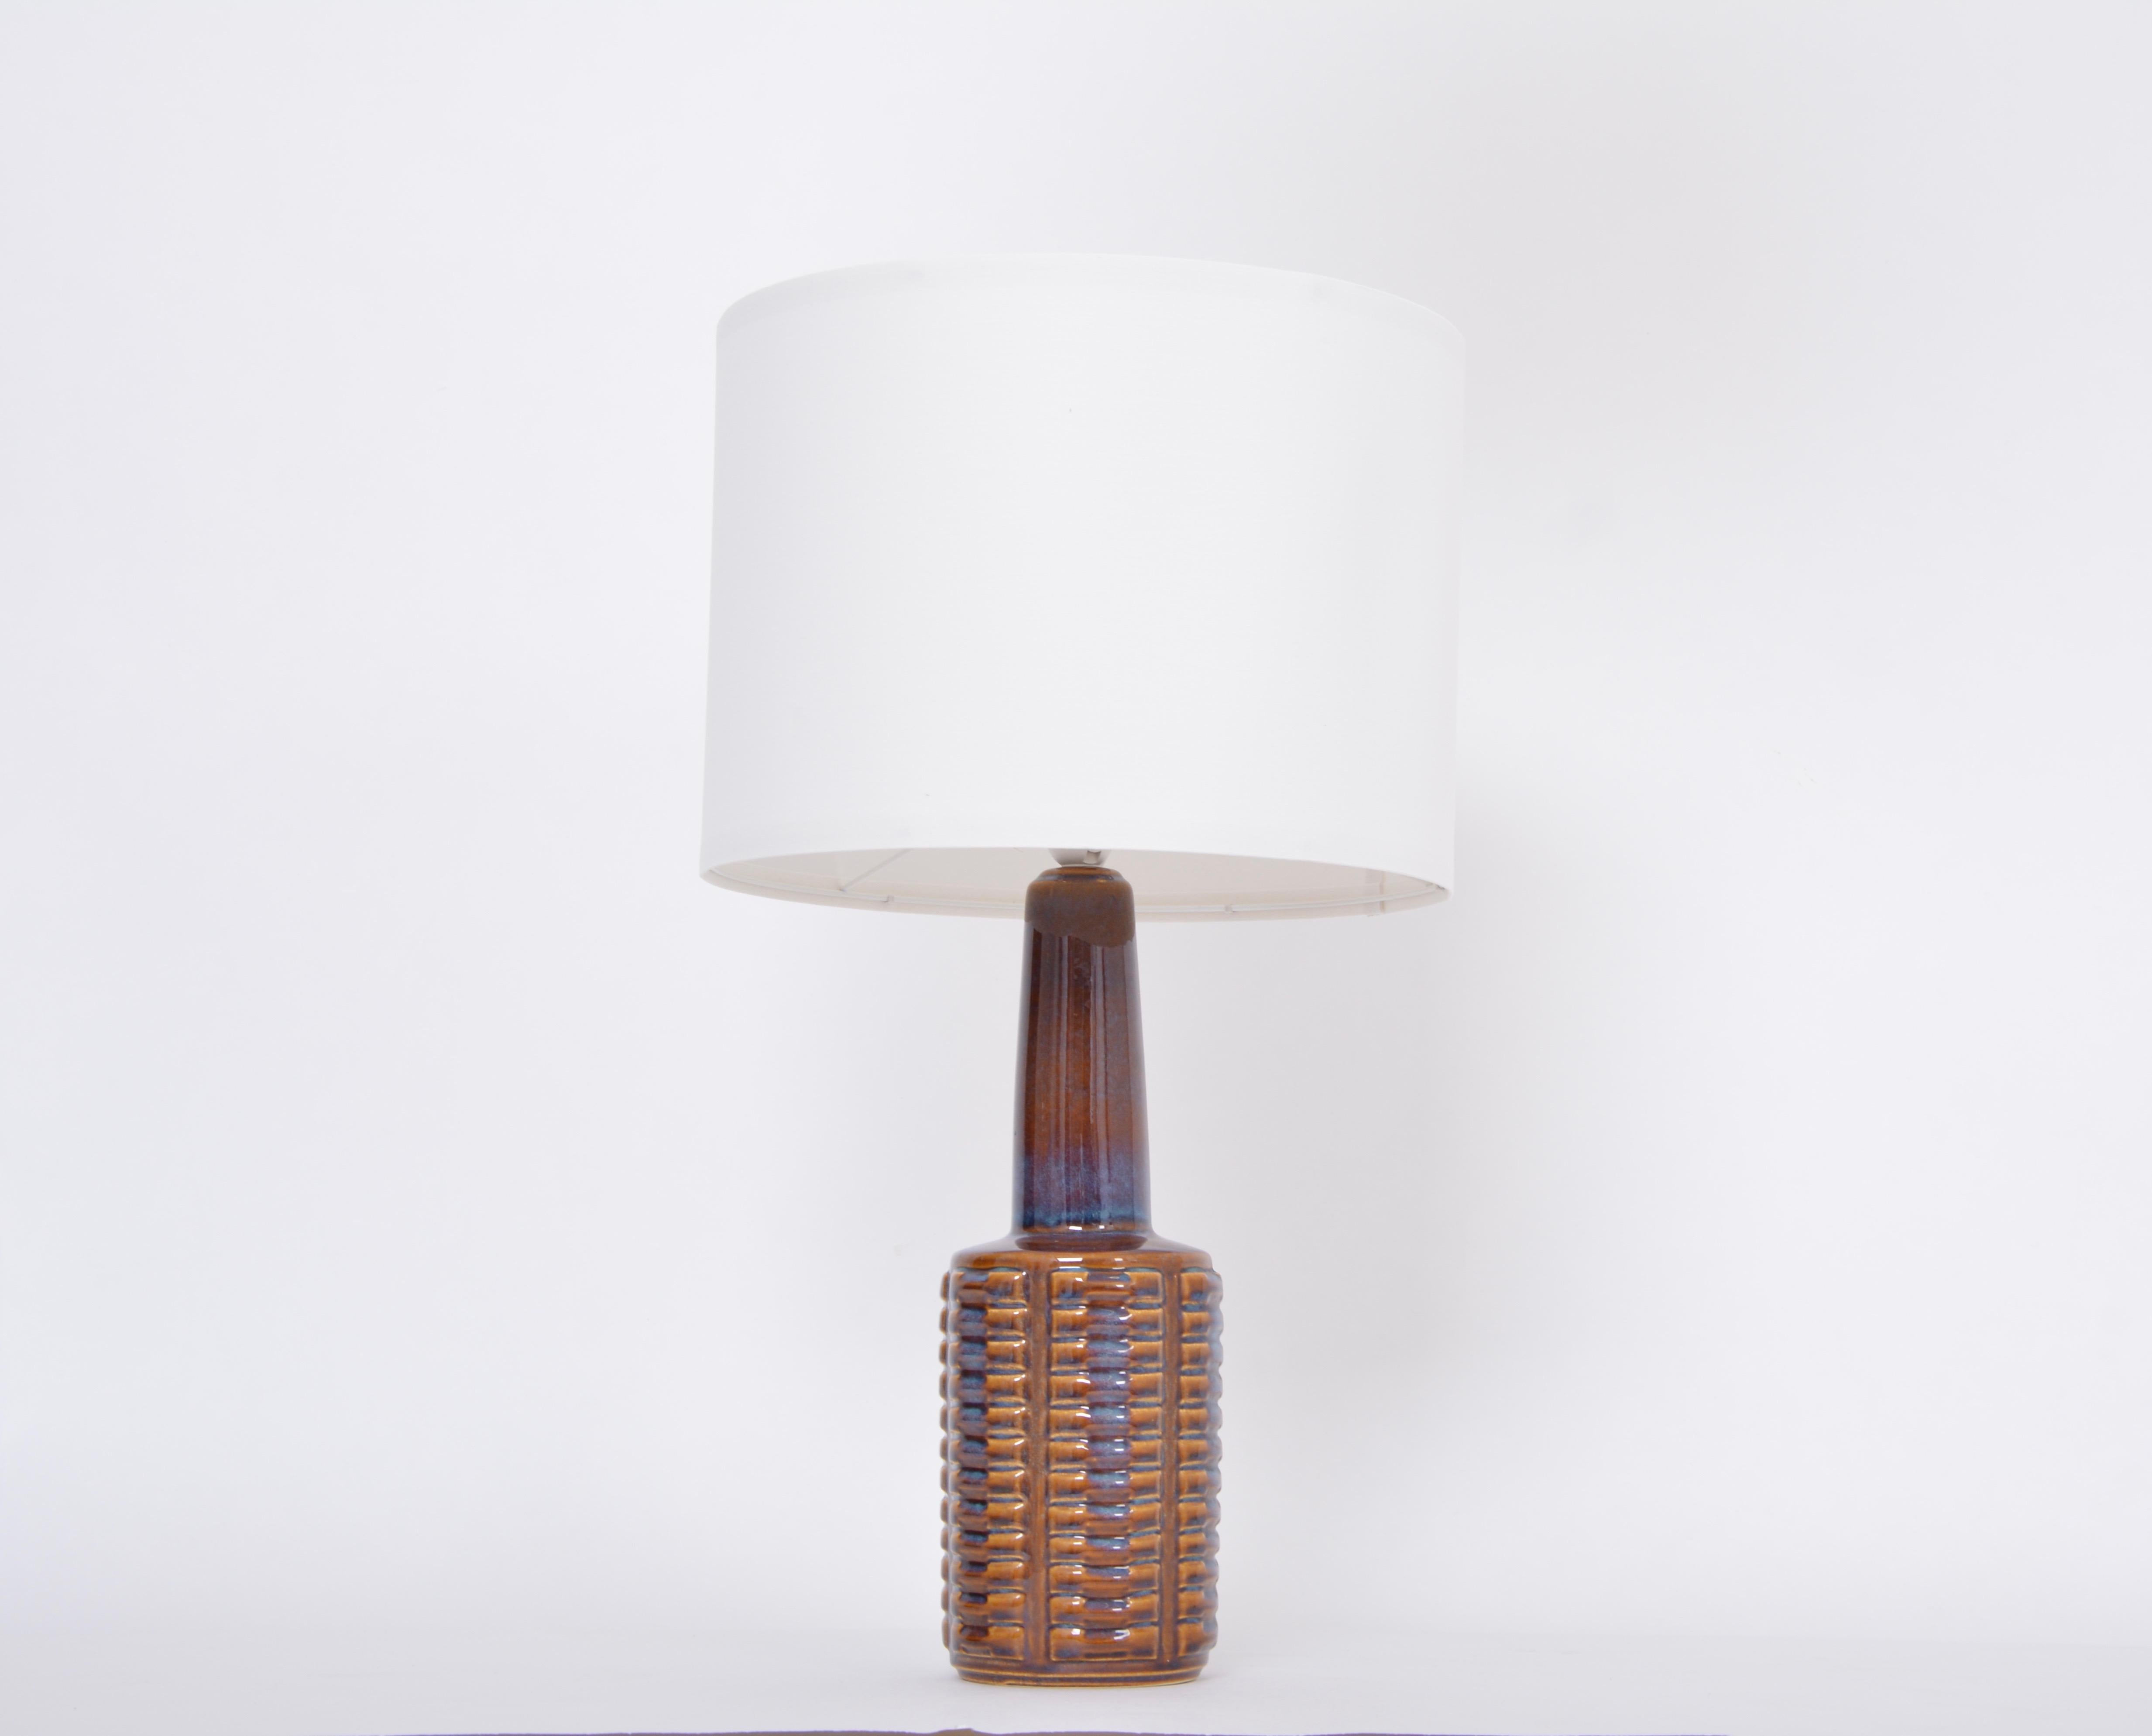 Tall Mid-Century Modern ceramic table lamp model 1023 by Einar Johansen for Soholm
This table lamp was designed by Einar Johansen and produced by Soholm Stentoj in Denmark in the 1960s. Gorgeous glazing in different colors ranging from brown to